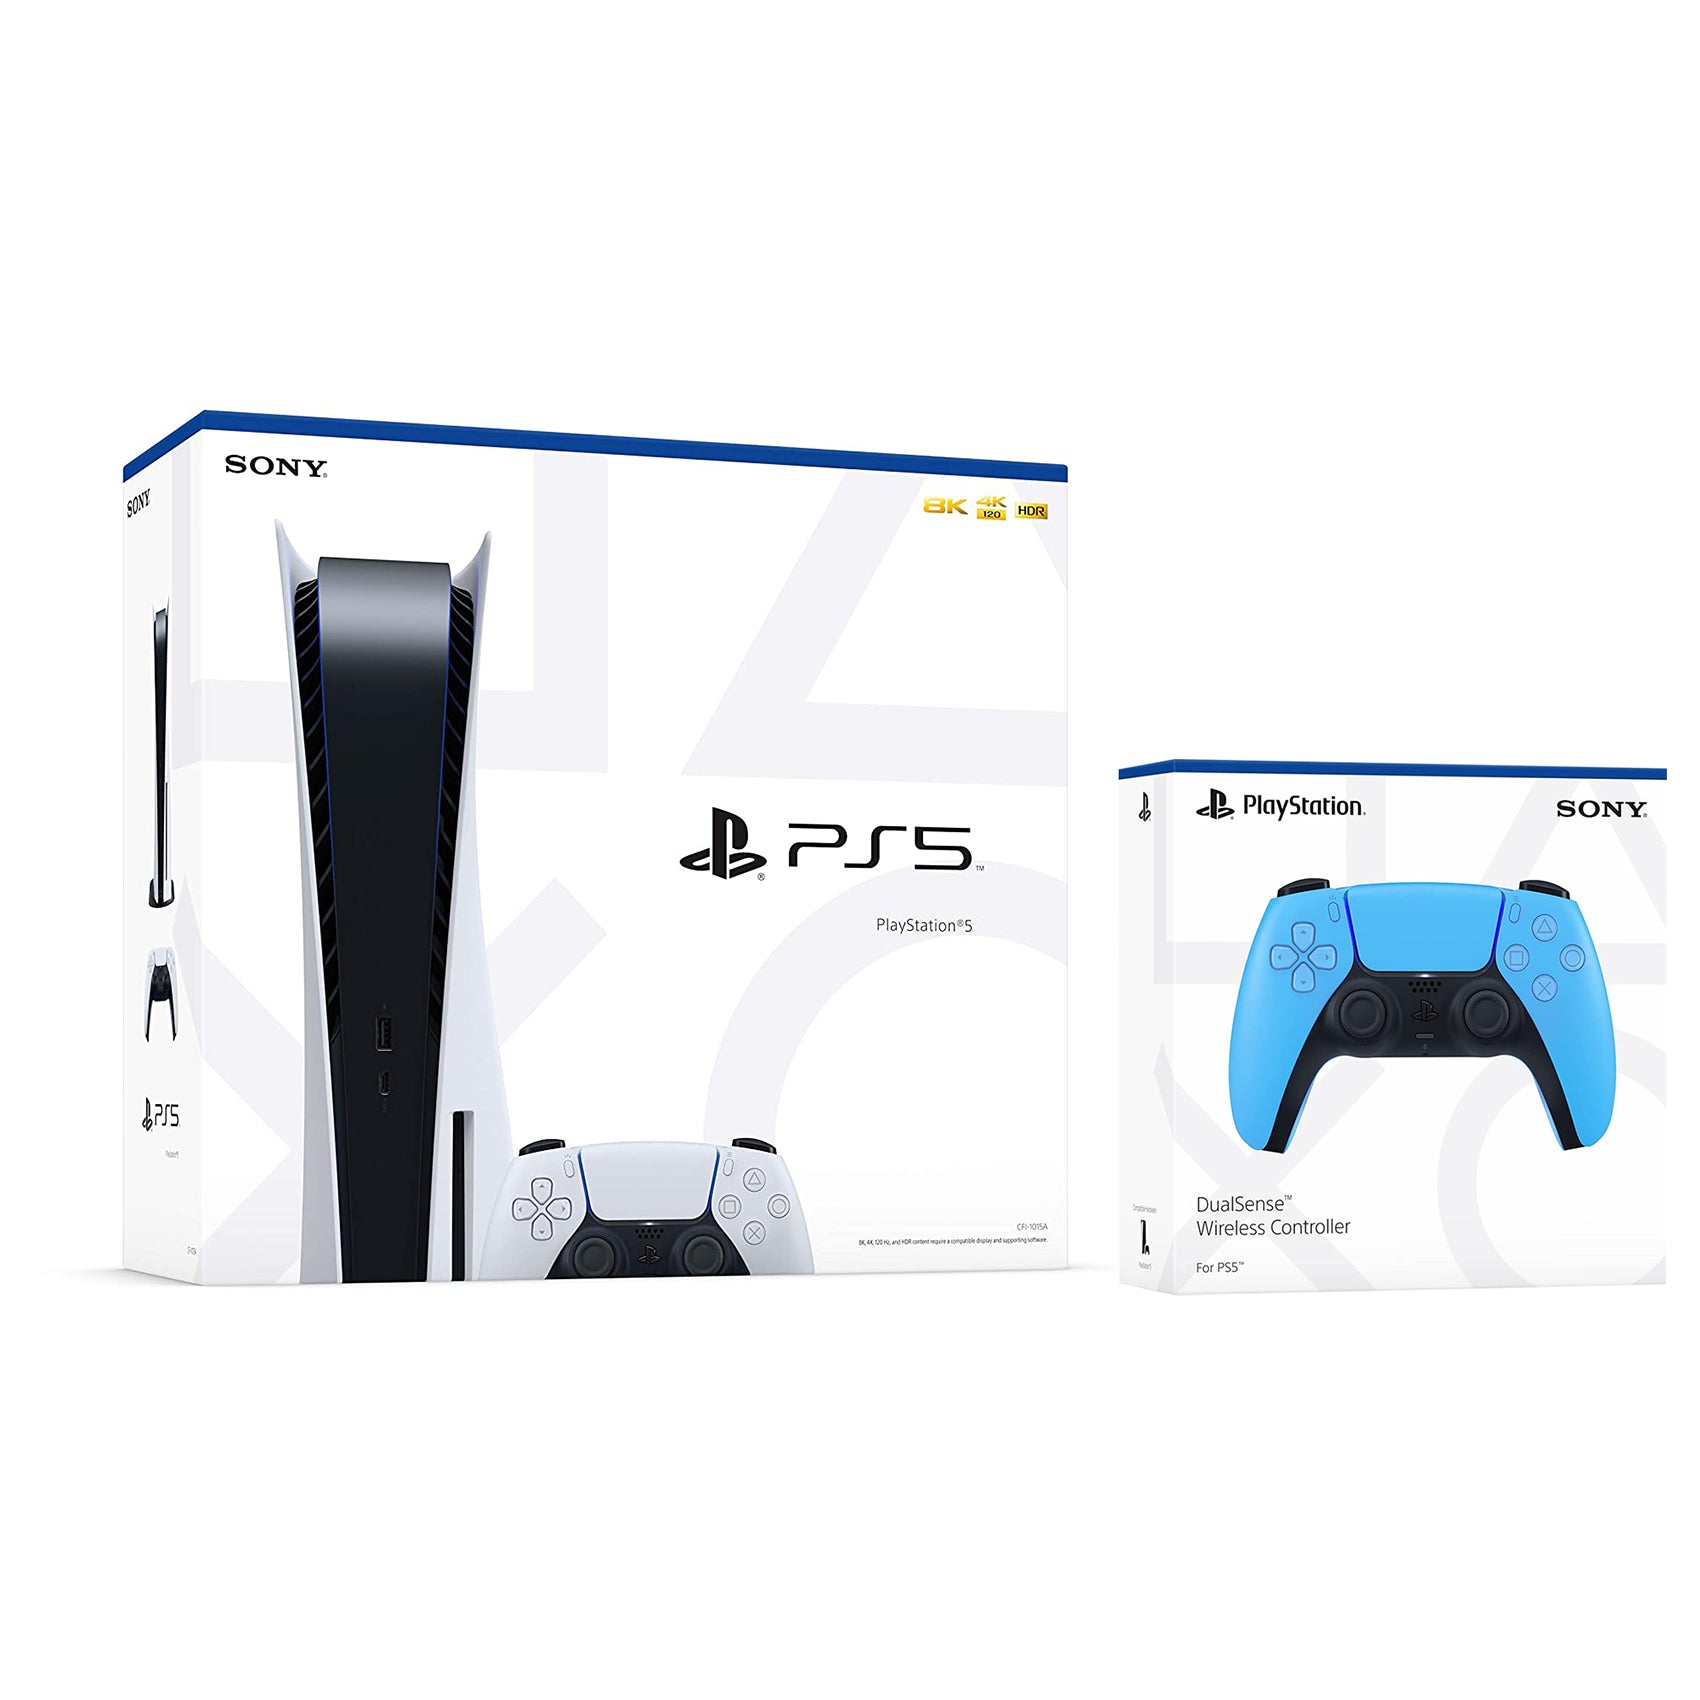 Sony Playstation 5 Disc Version (Sony PS5 Disc) with Extra DualSense Controller - Starlight Blue Bundle - Pro-Distributing